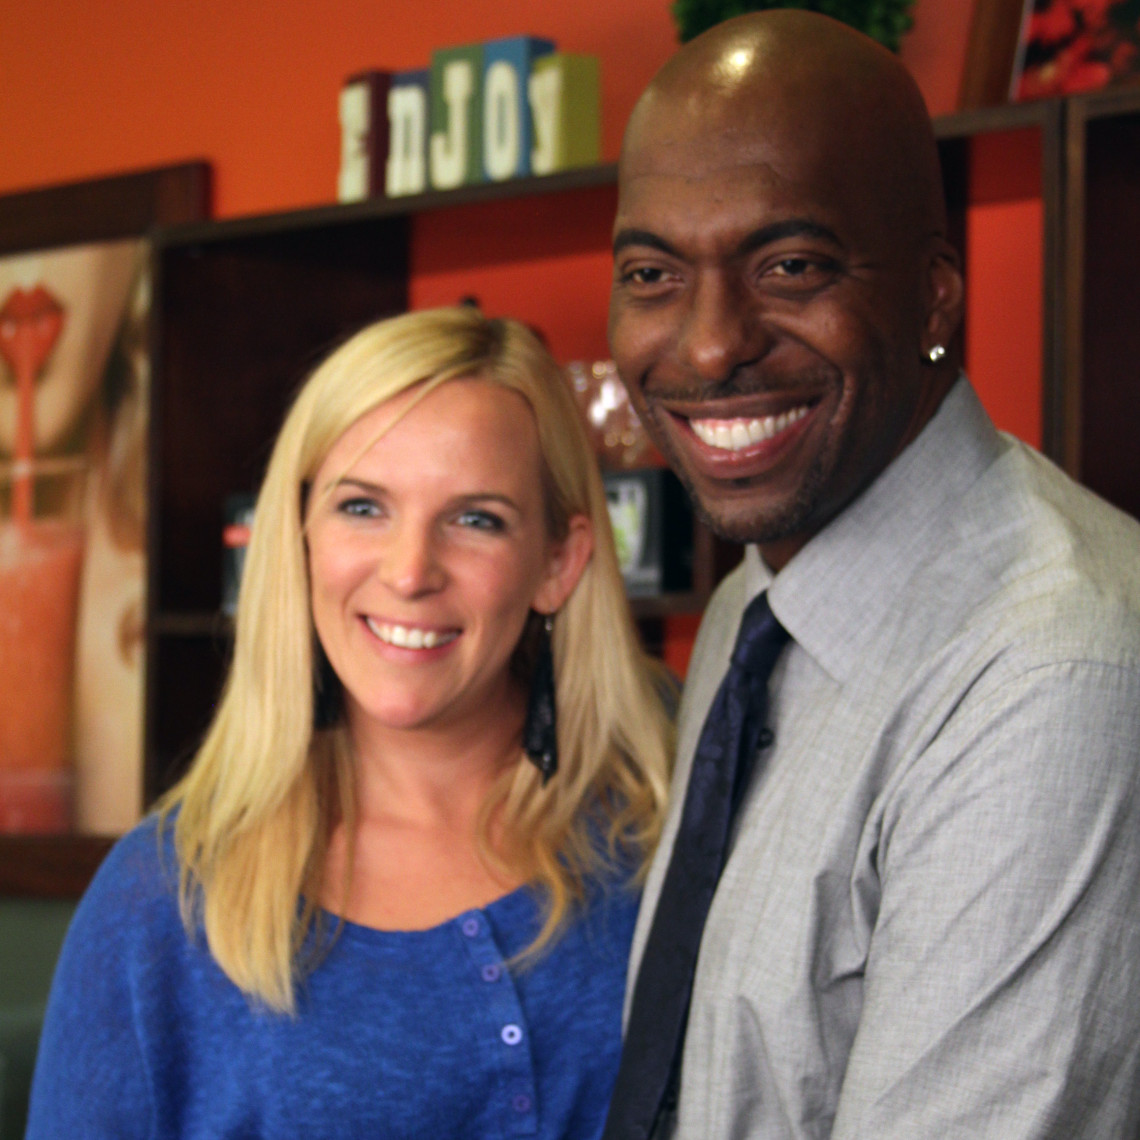 John Salley takes Allison Melody shopping at Whole Foods.